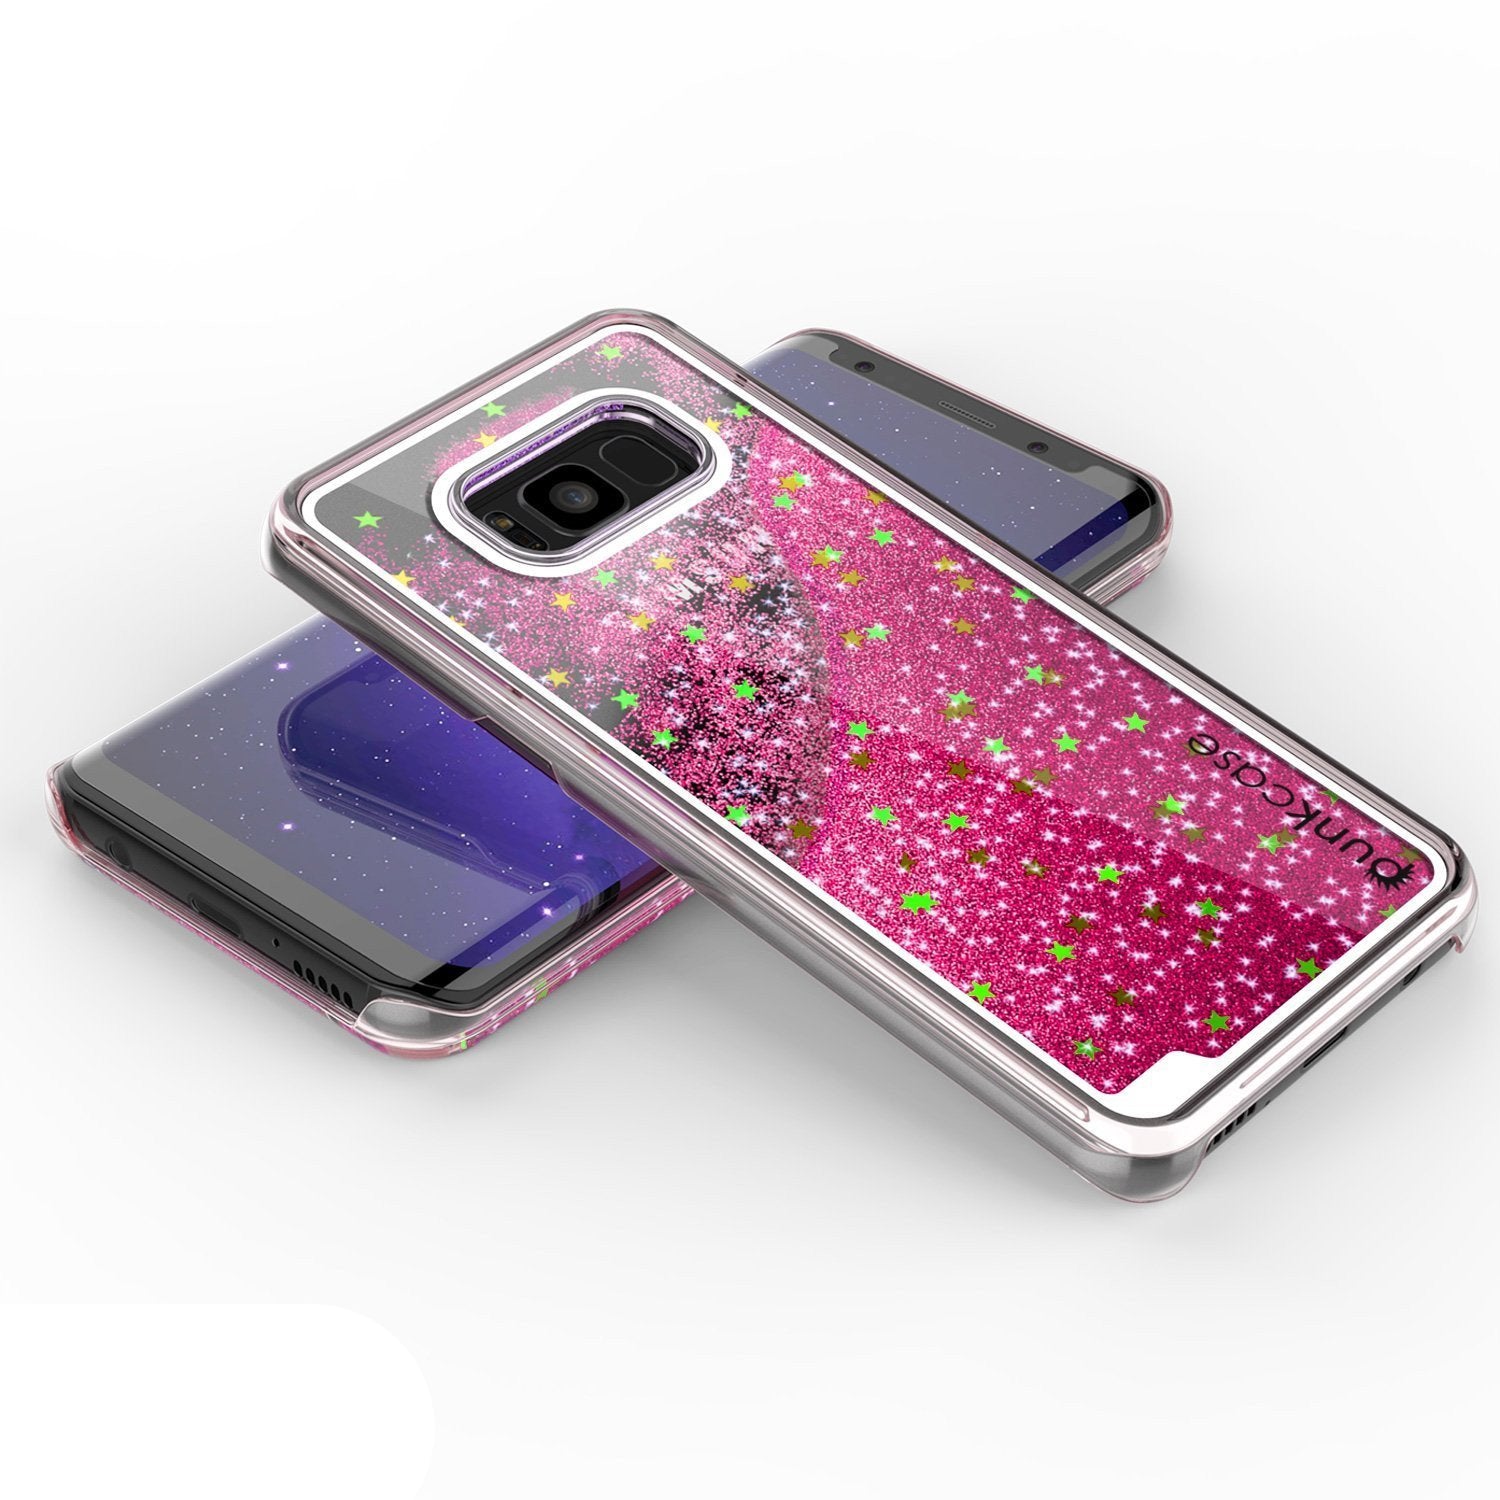 Galaxy S8 Case, Punkcase Liquid Pink Series Protective Dual Layer Floating Glitter Cover